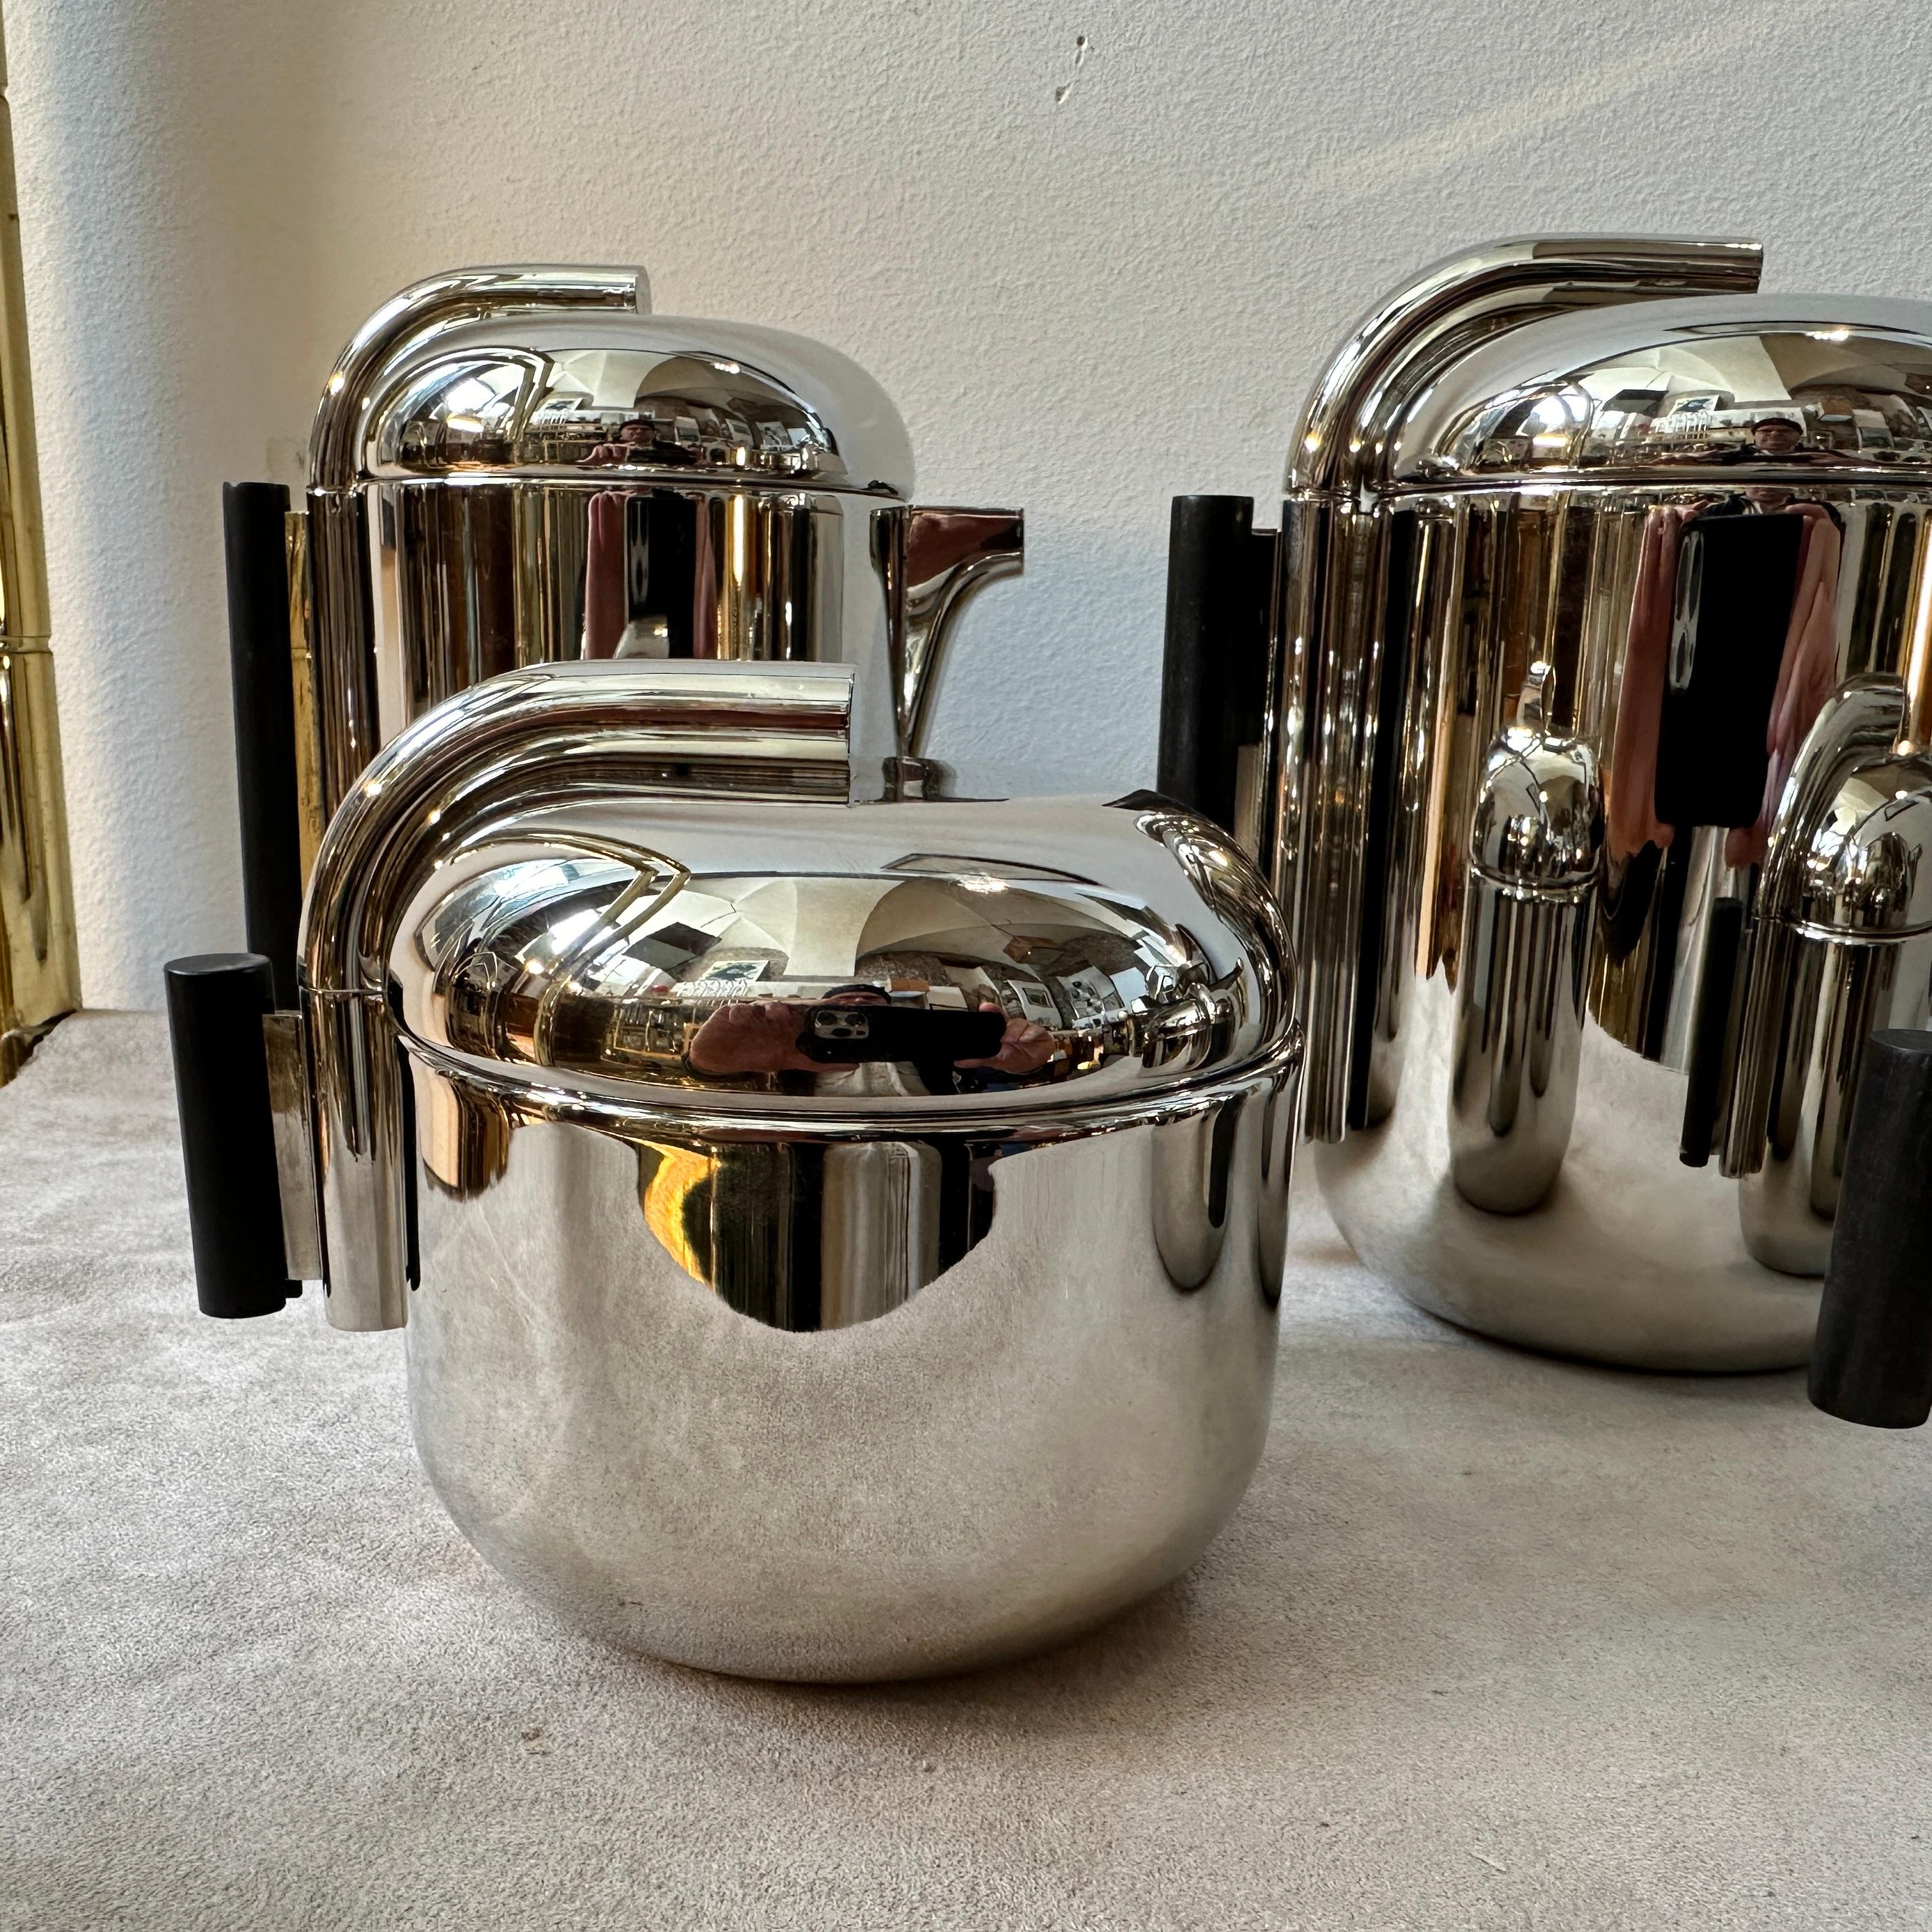 1960s Silver Plated Tea and Coffee Set Designed by G. Coarezza for Mam Milano For Sale 4